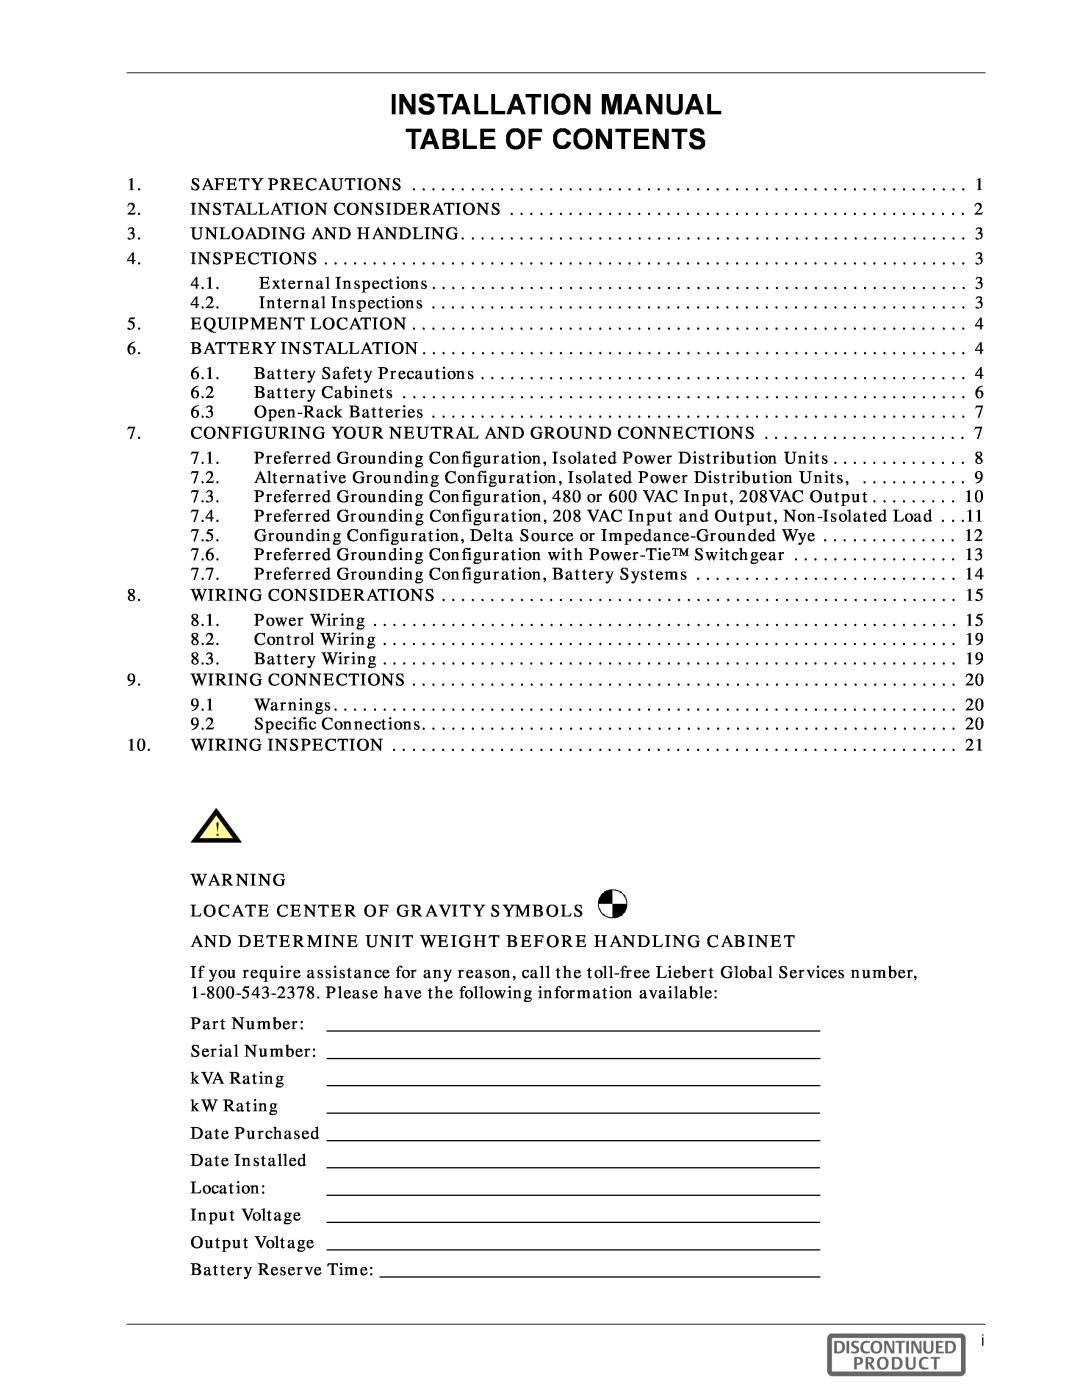 Emerson SERIES 600T manual Installation Manual Table Of Contents, Locate Center Of Gravity Symbols, Discontinued Product 